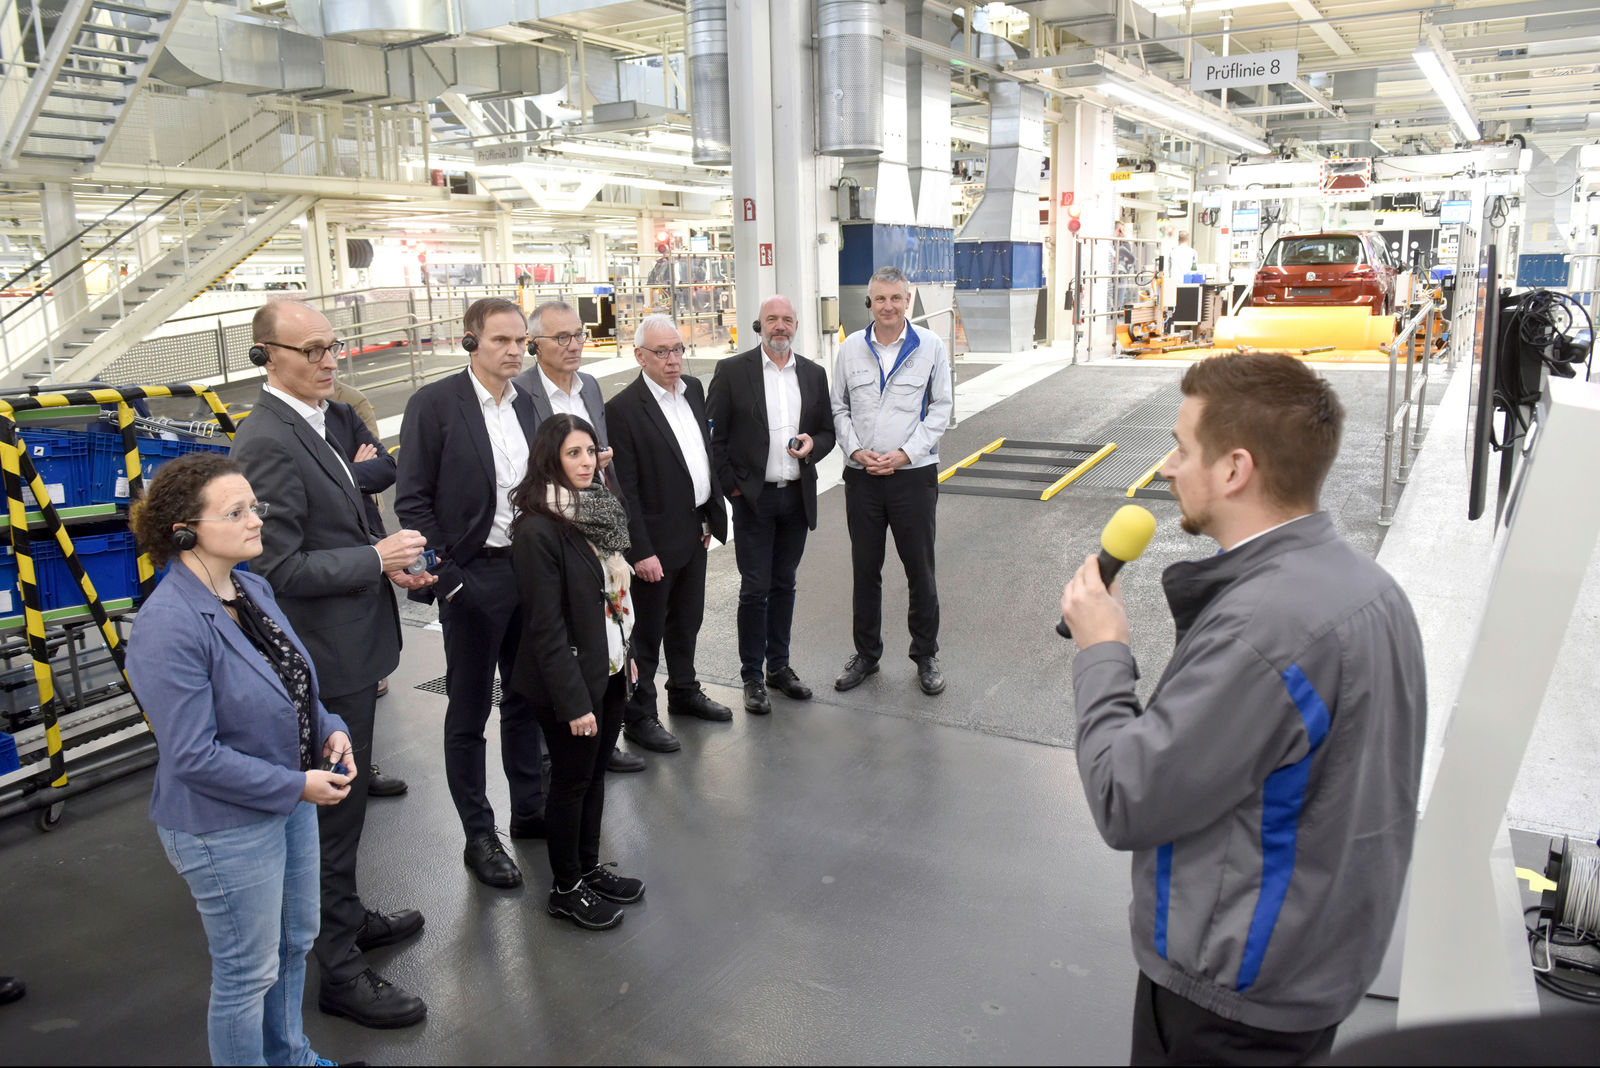 Wolfsburg plant is investing heavily in digital solutions